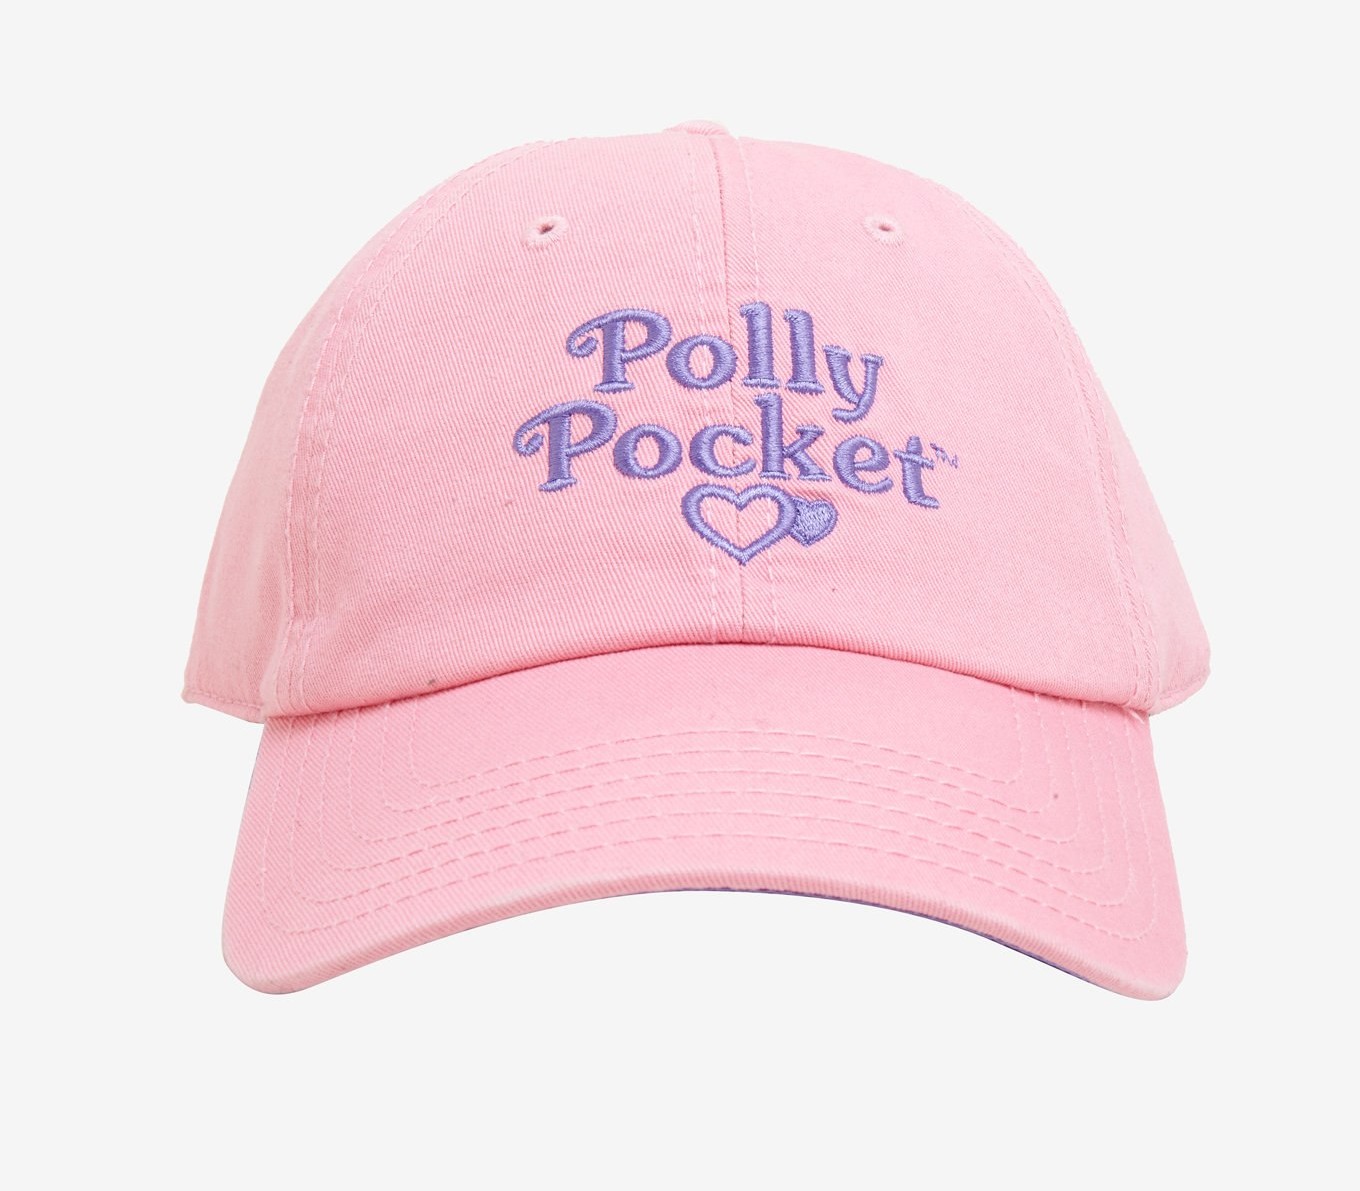 Hot Topic Polly Pocket collection